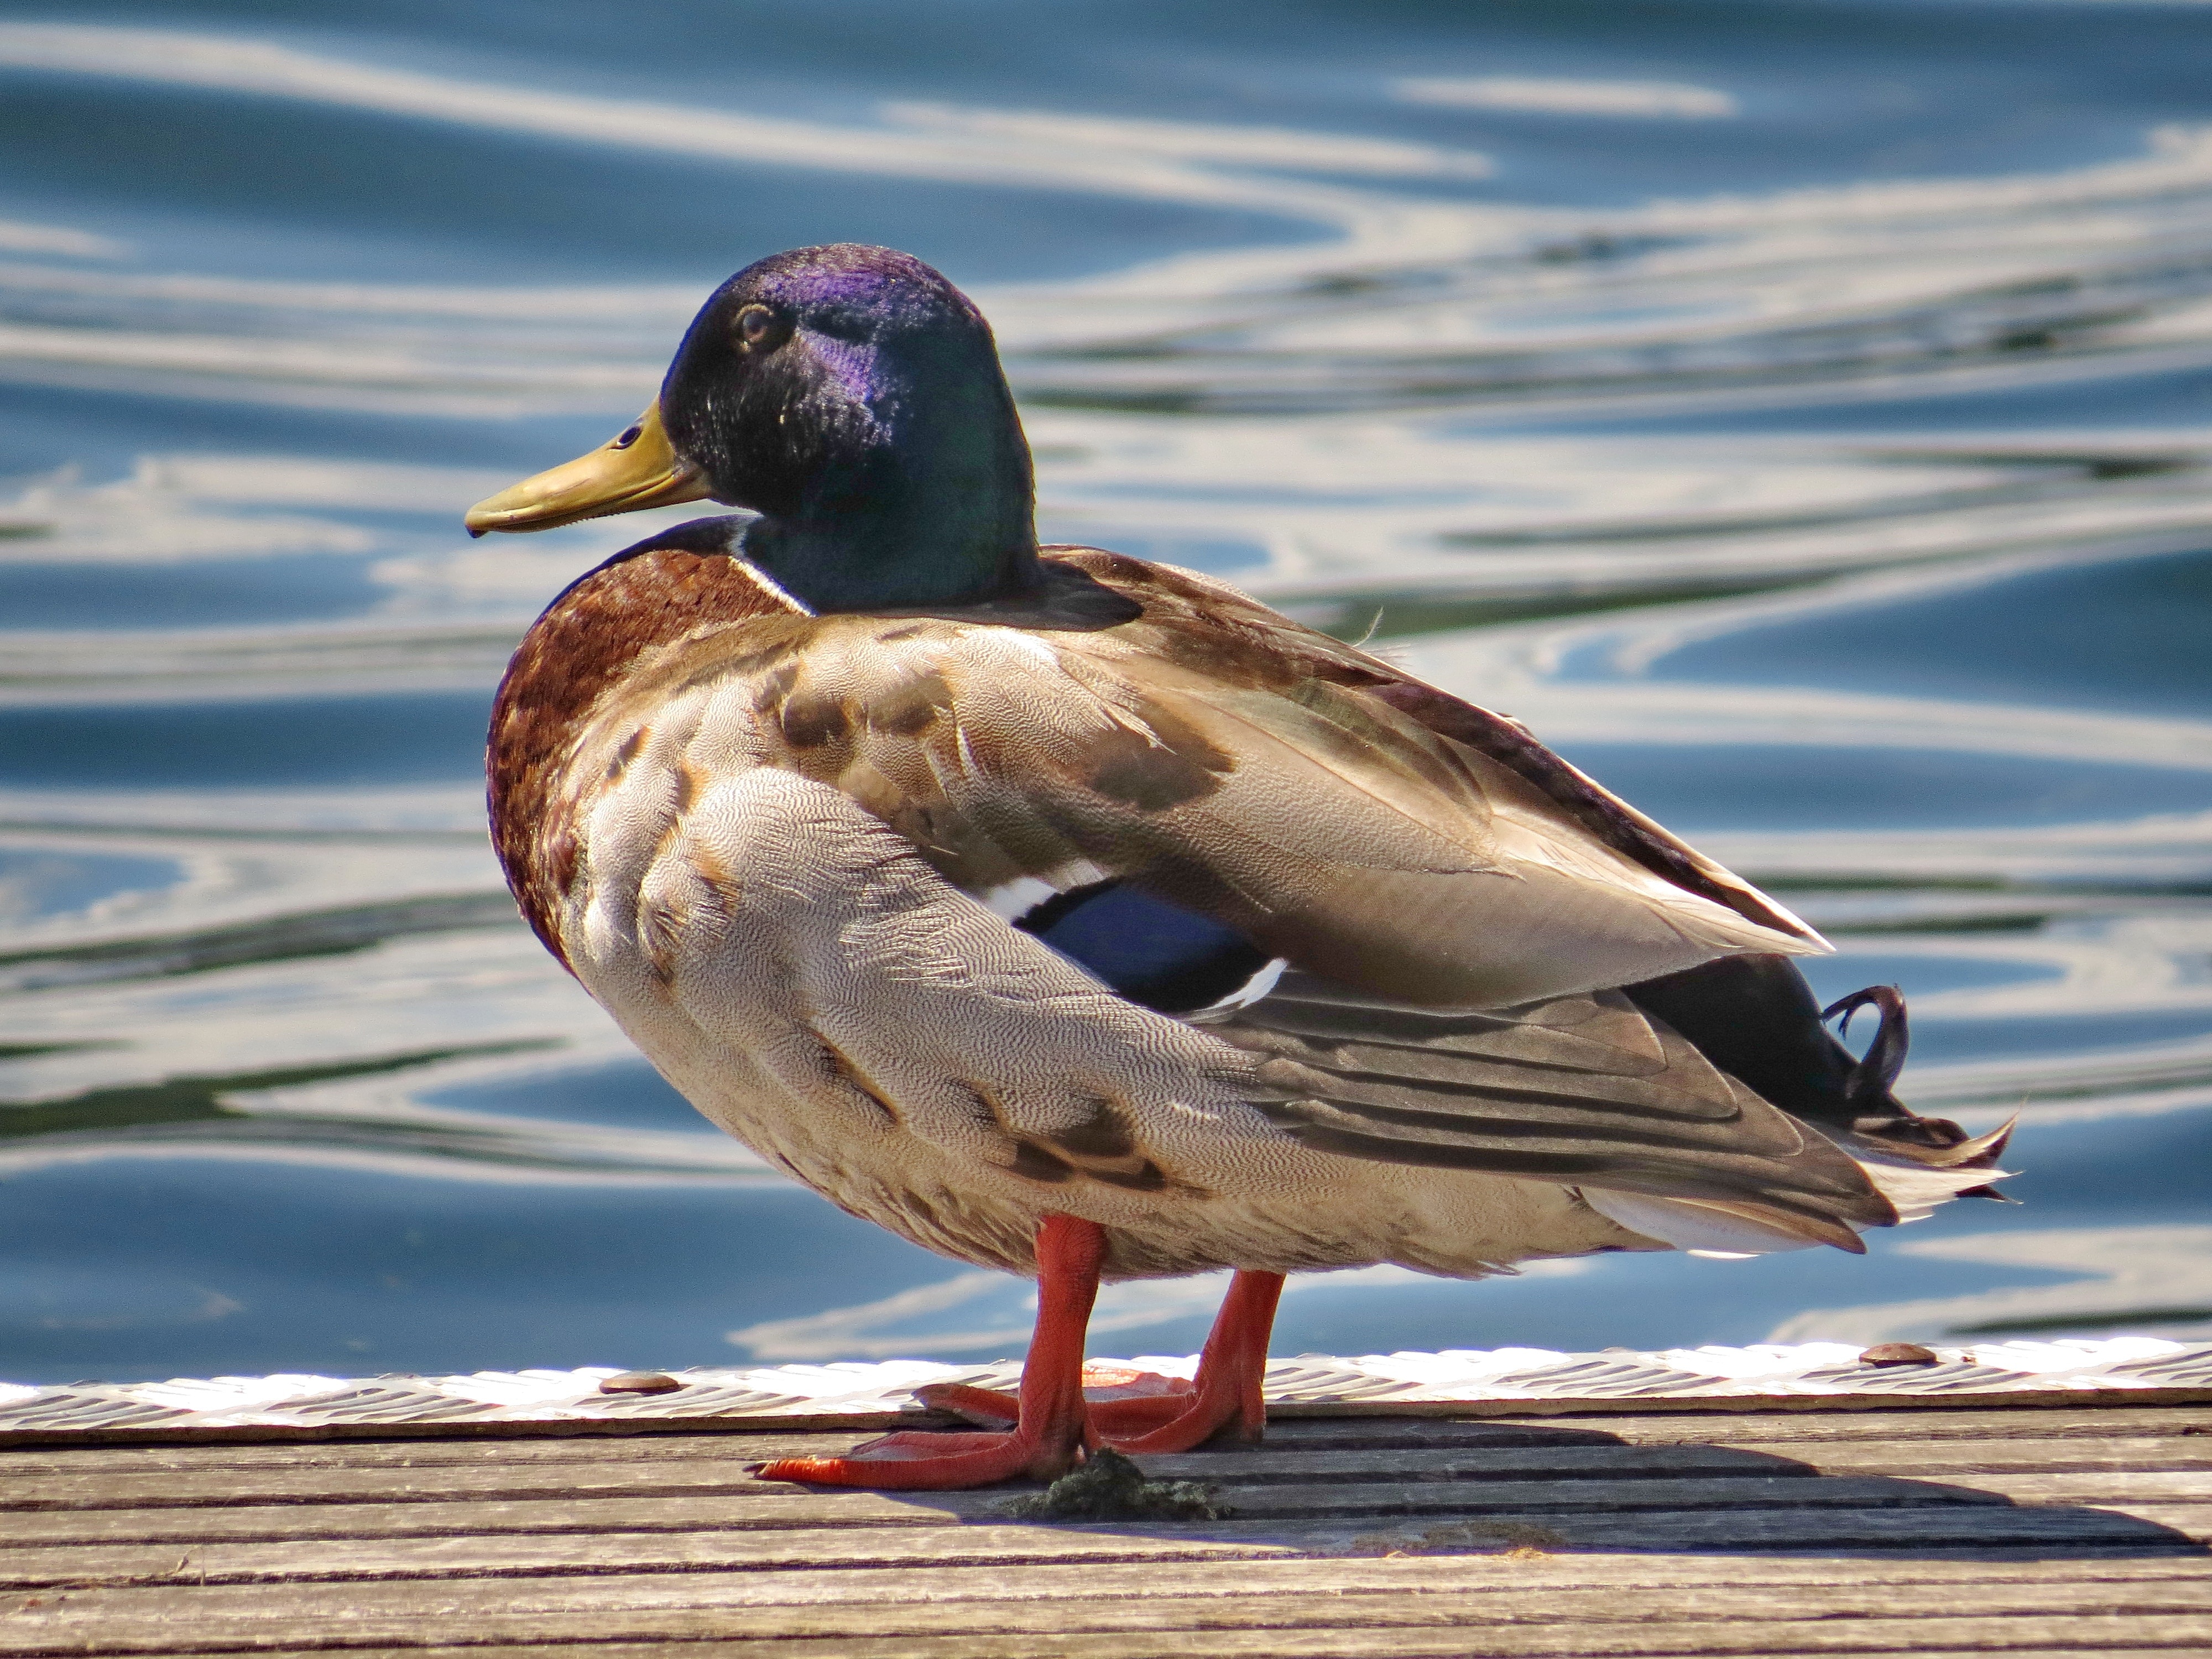 close up photography of brown and gray duck standing on seashore during daytime